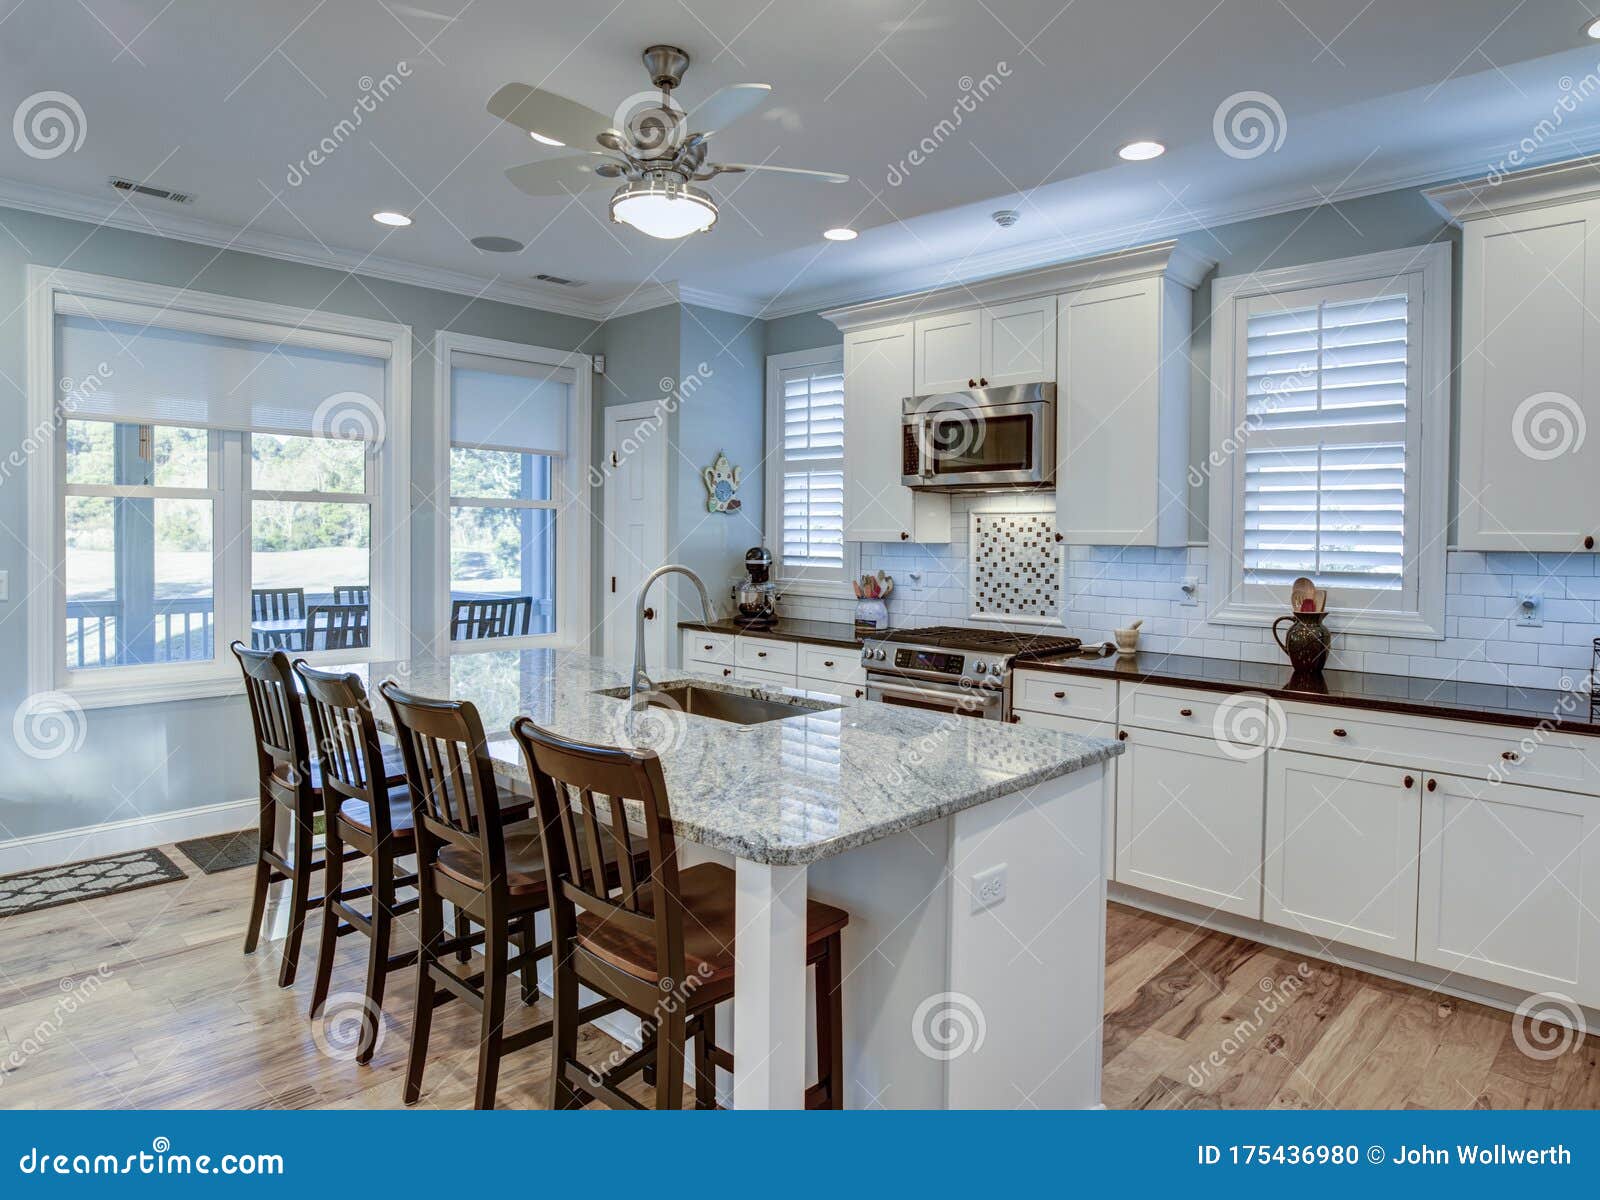 beautiful luxury kitchen with quarz countertops and view windows